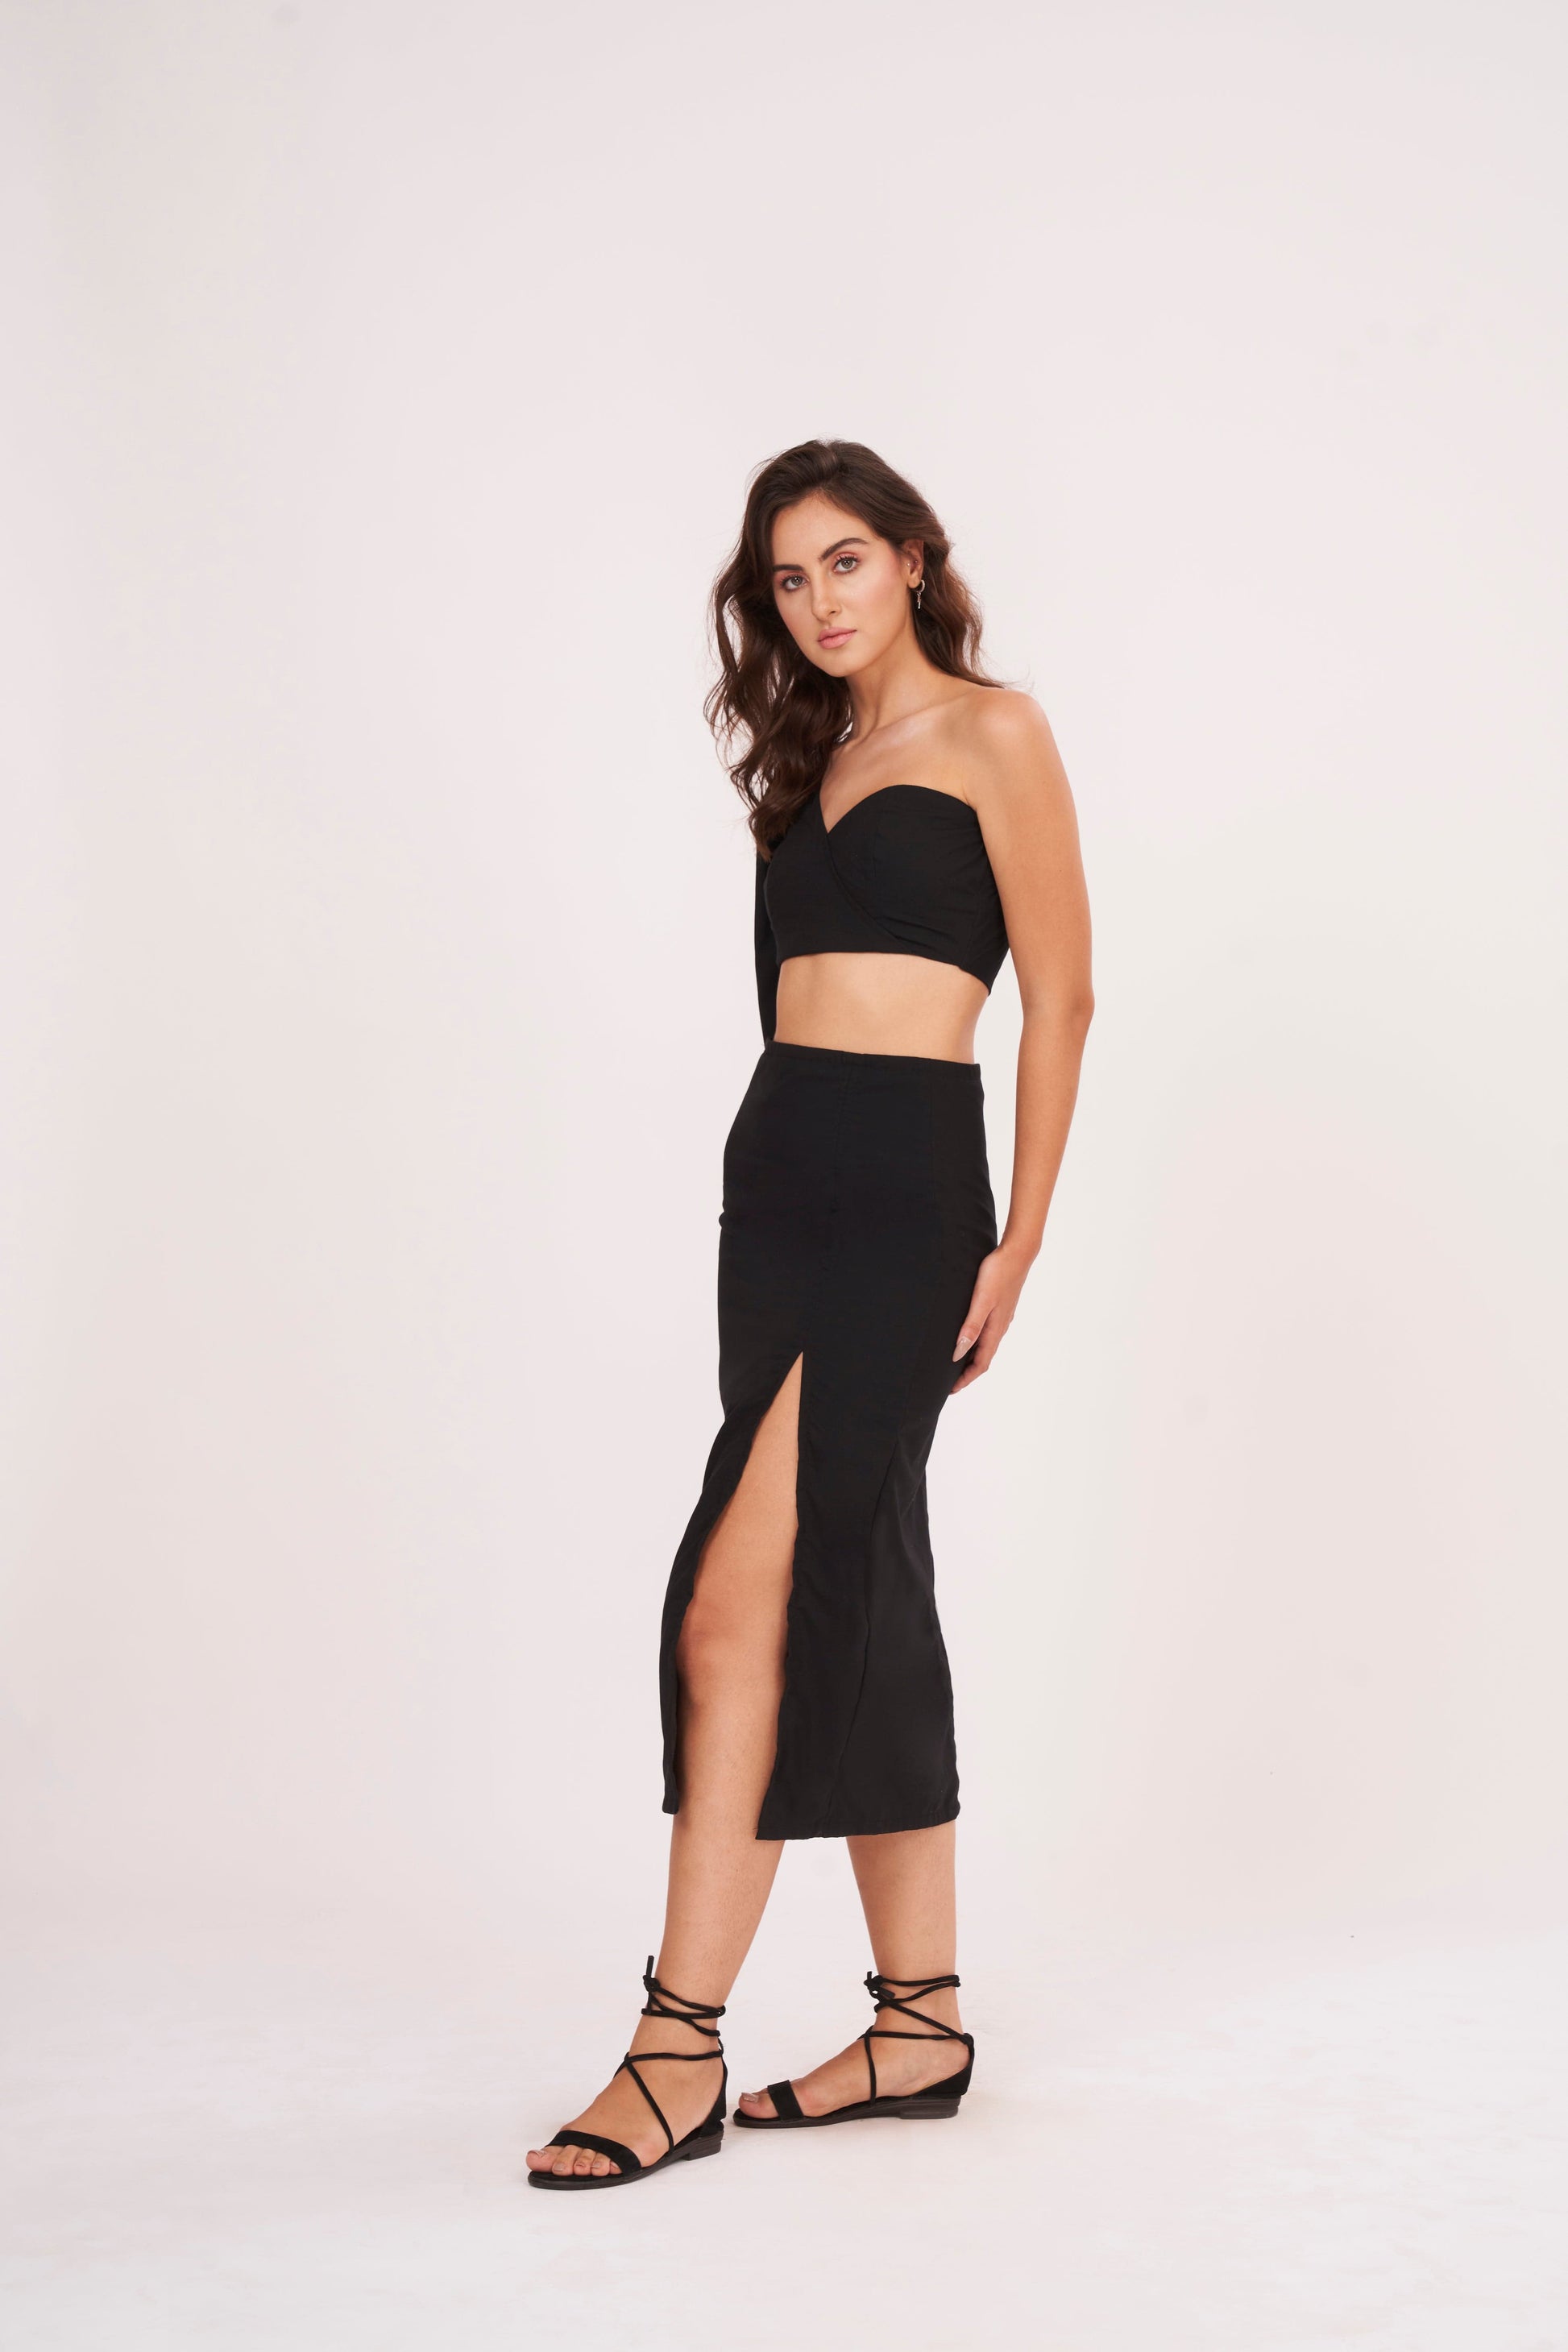 Elegant high-waisted black muslin skirt with thigh-high slit, offering sophistication and glamour for chic occasions